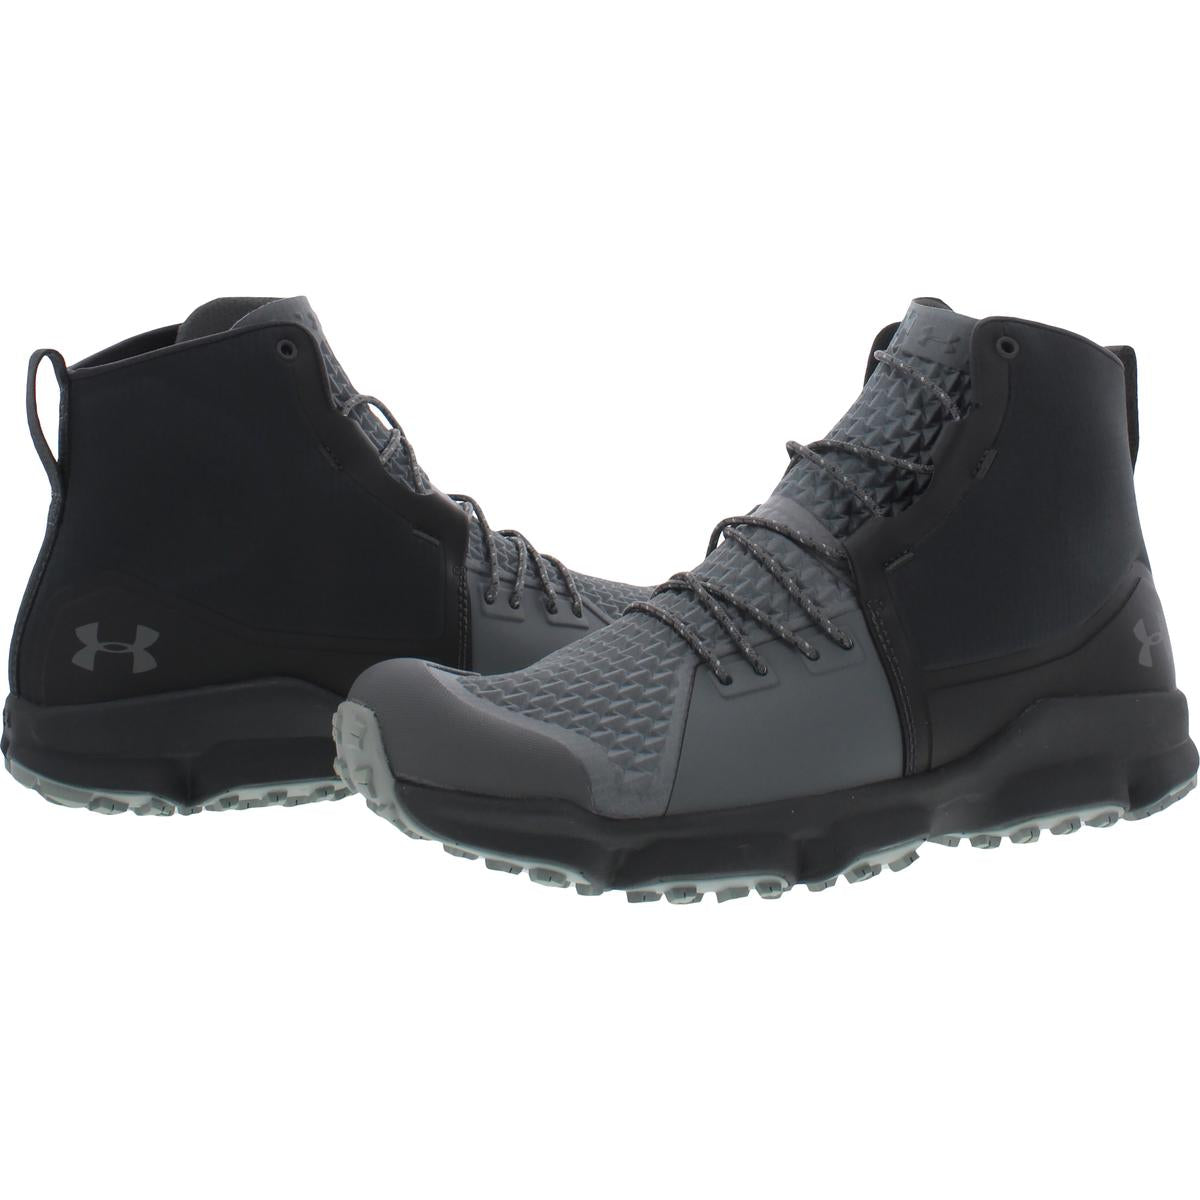 Under Armour Mens Speedfit 2.0 Trail Outdoor Hiking Boots